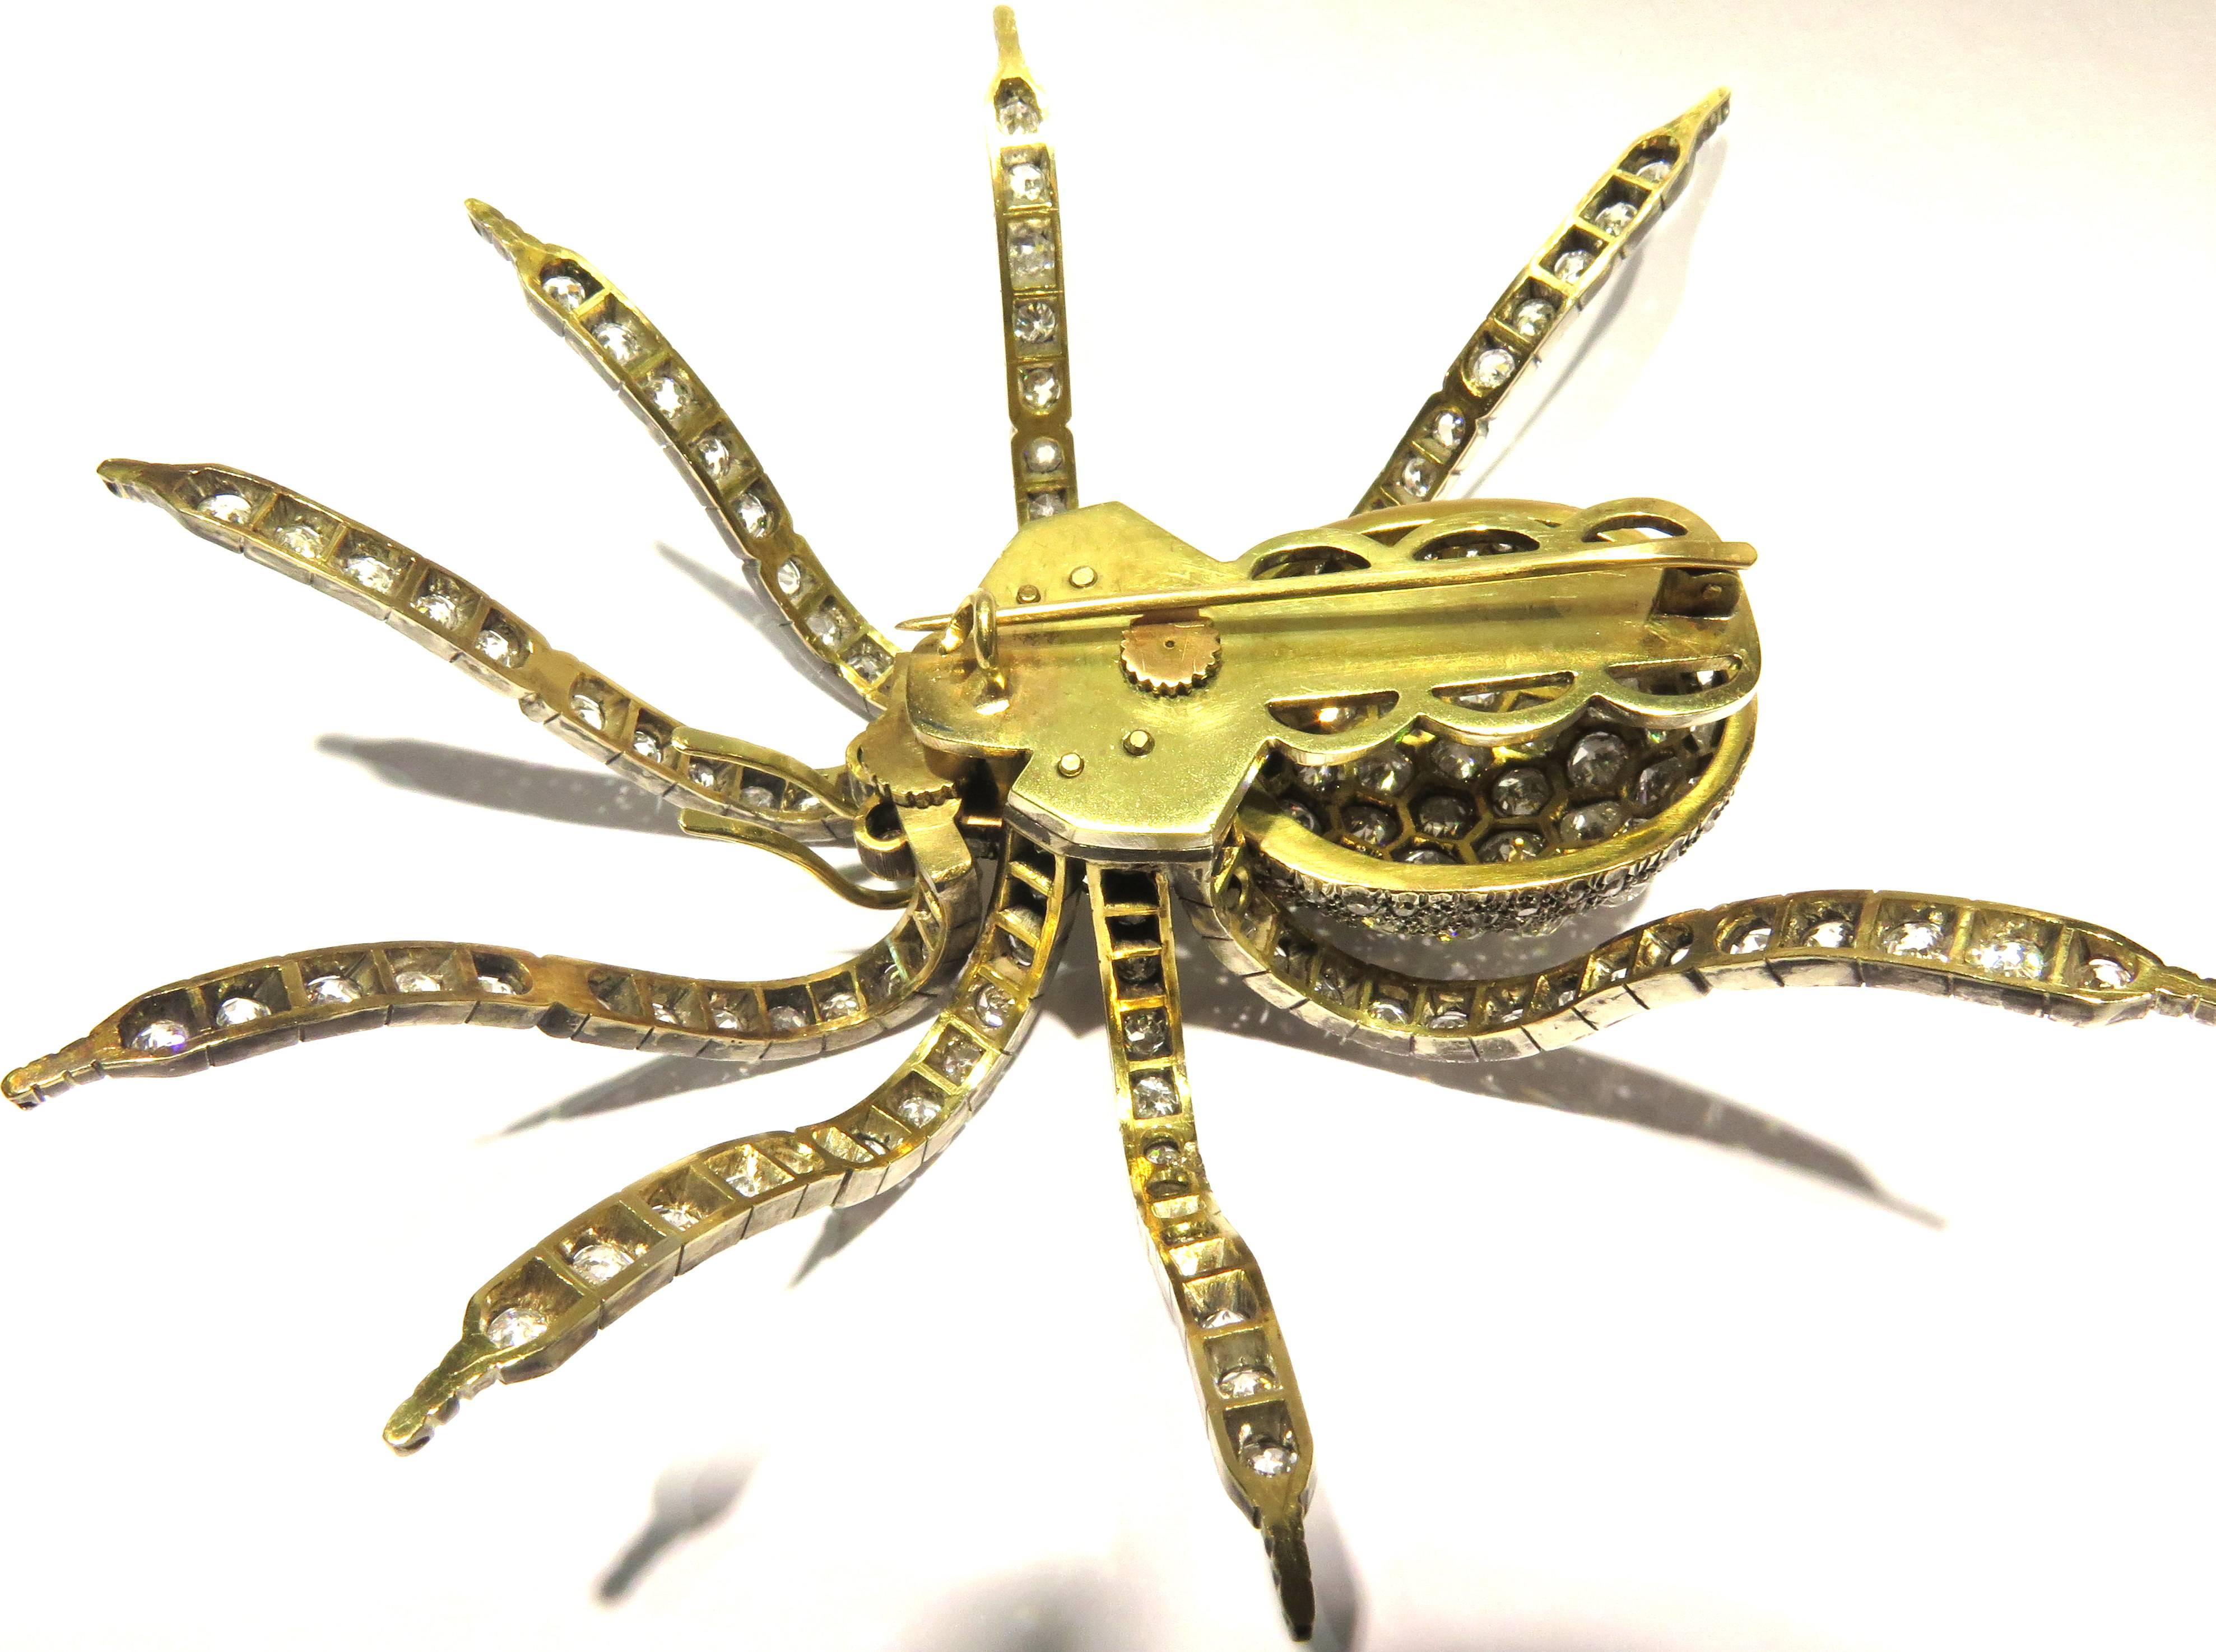 Magnificent XtraLarge Spider Pin 5 5/8 in 43cts Diamonds Gold SilverTremblant c 4